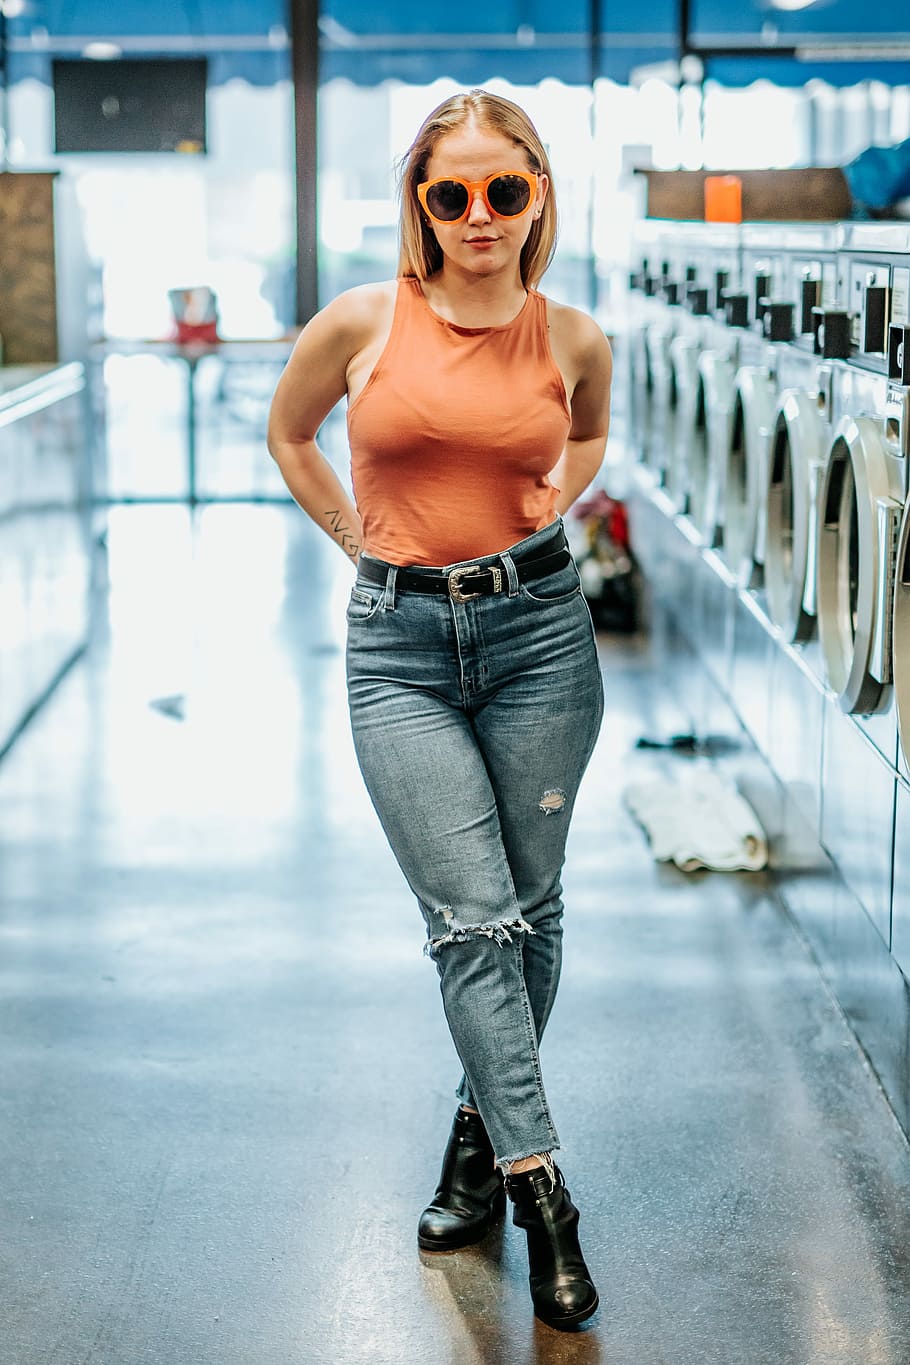 woman wearing orange sleeveless top and blue denim jeans standing near front-load laundry appliances, HD wallpaper